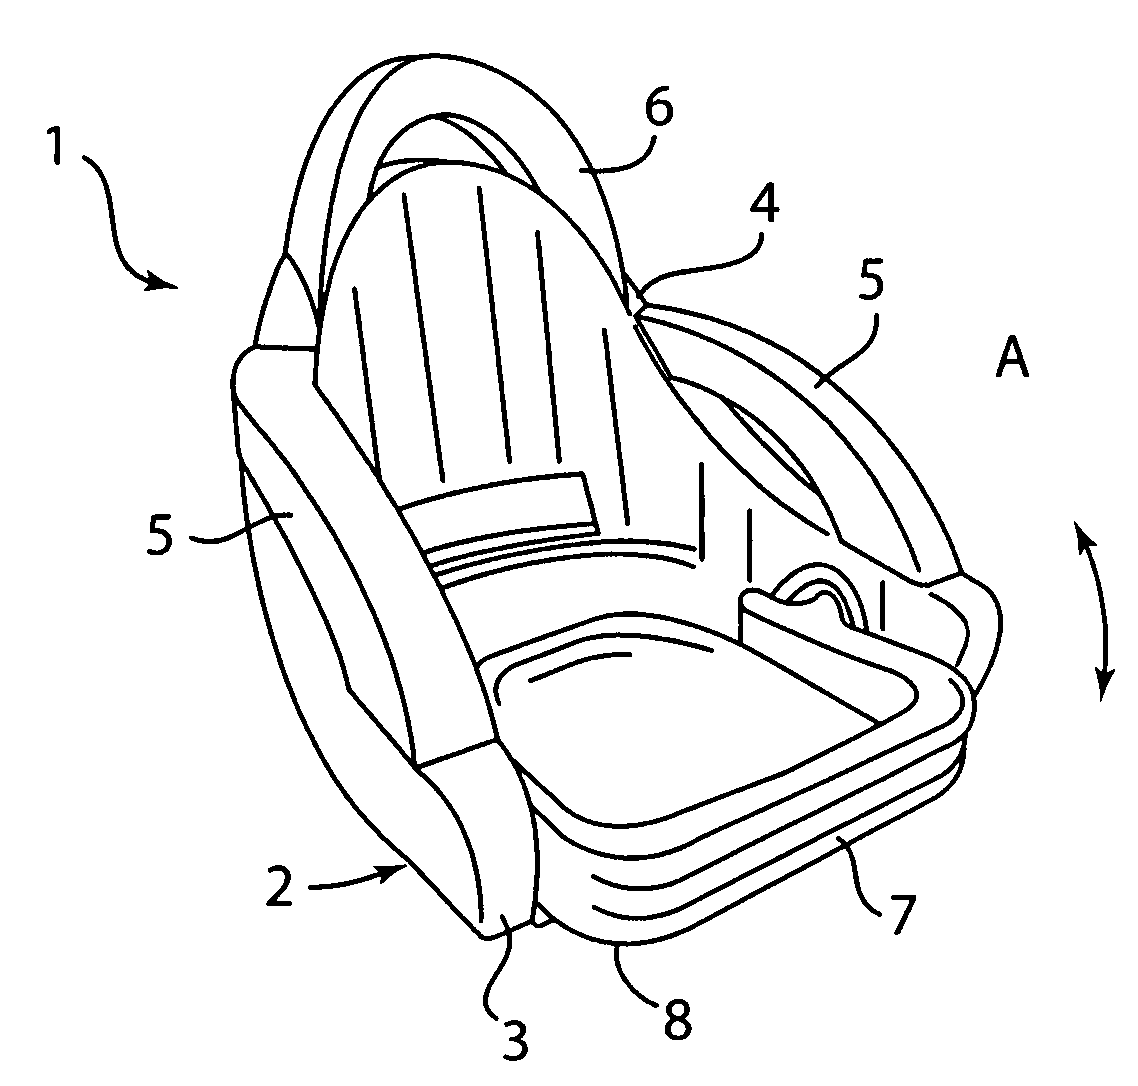 Marine seat interchangeable component assembly and method